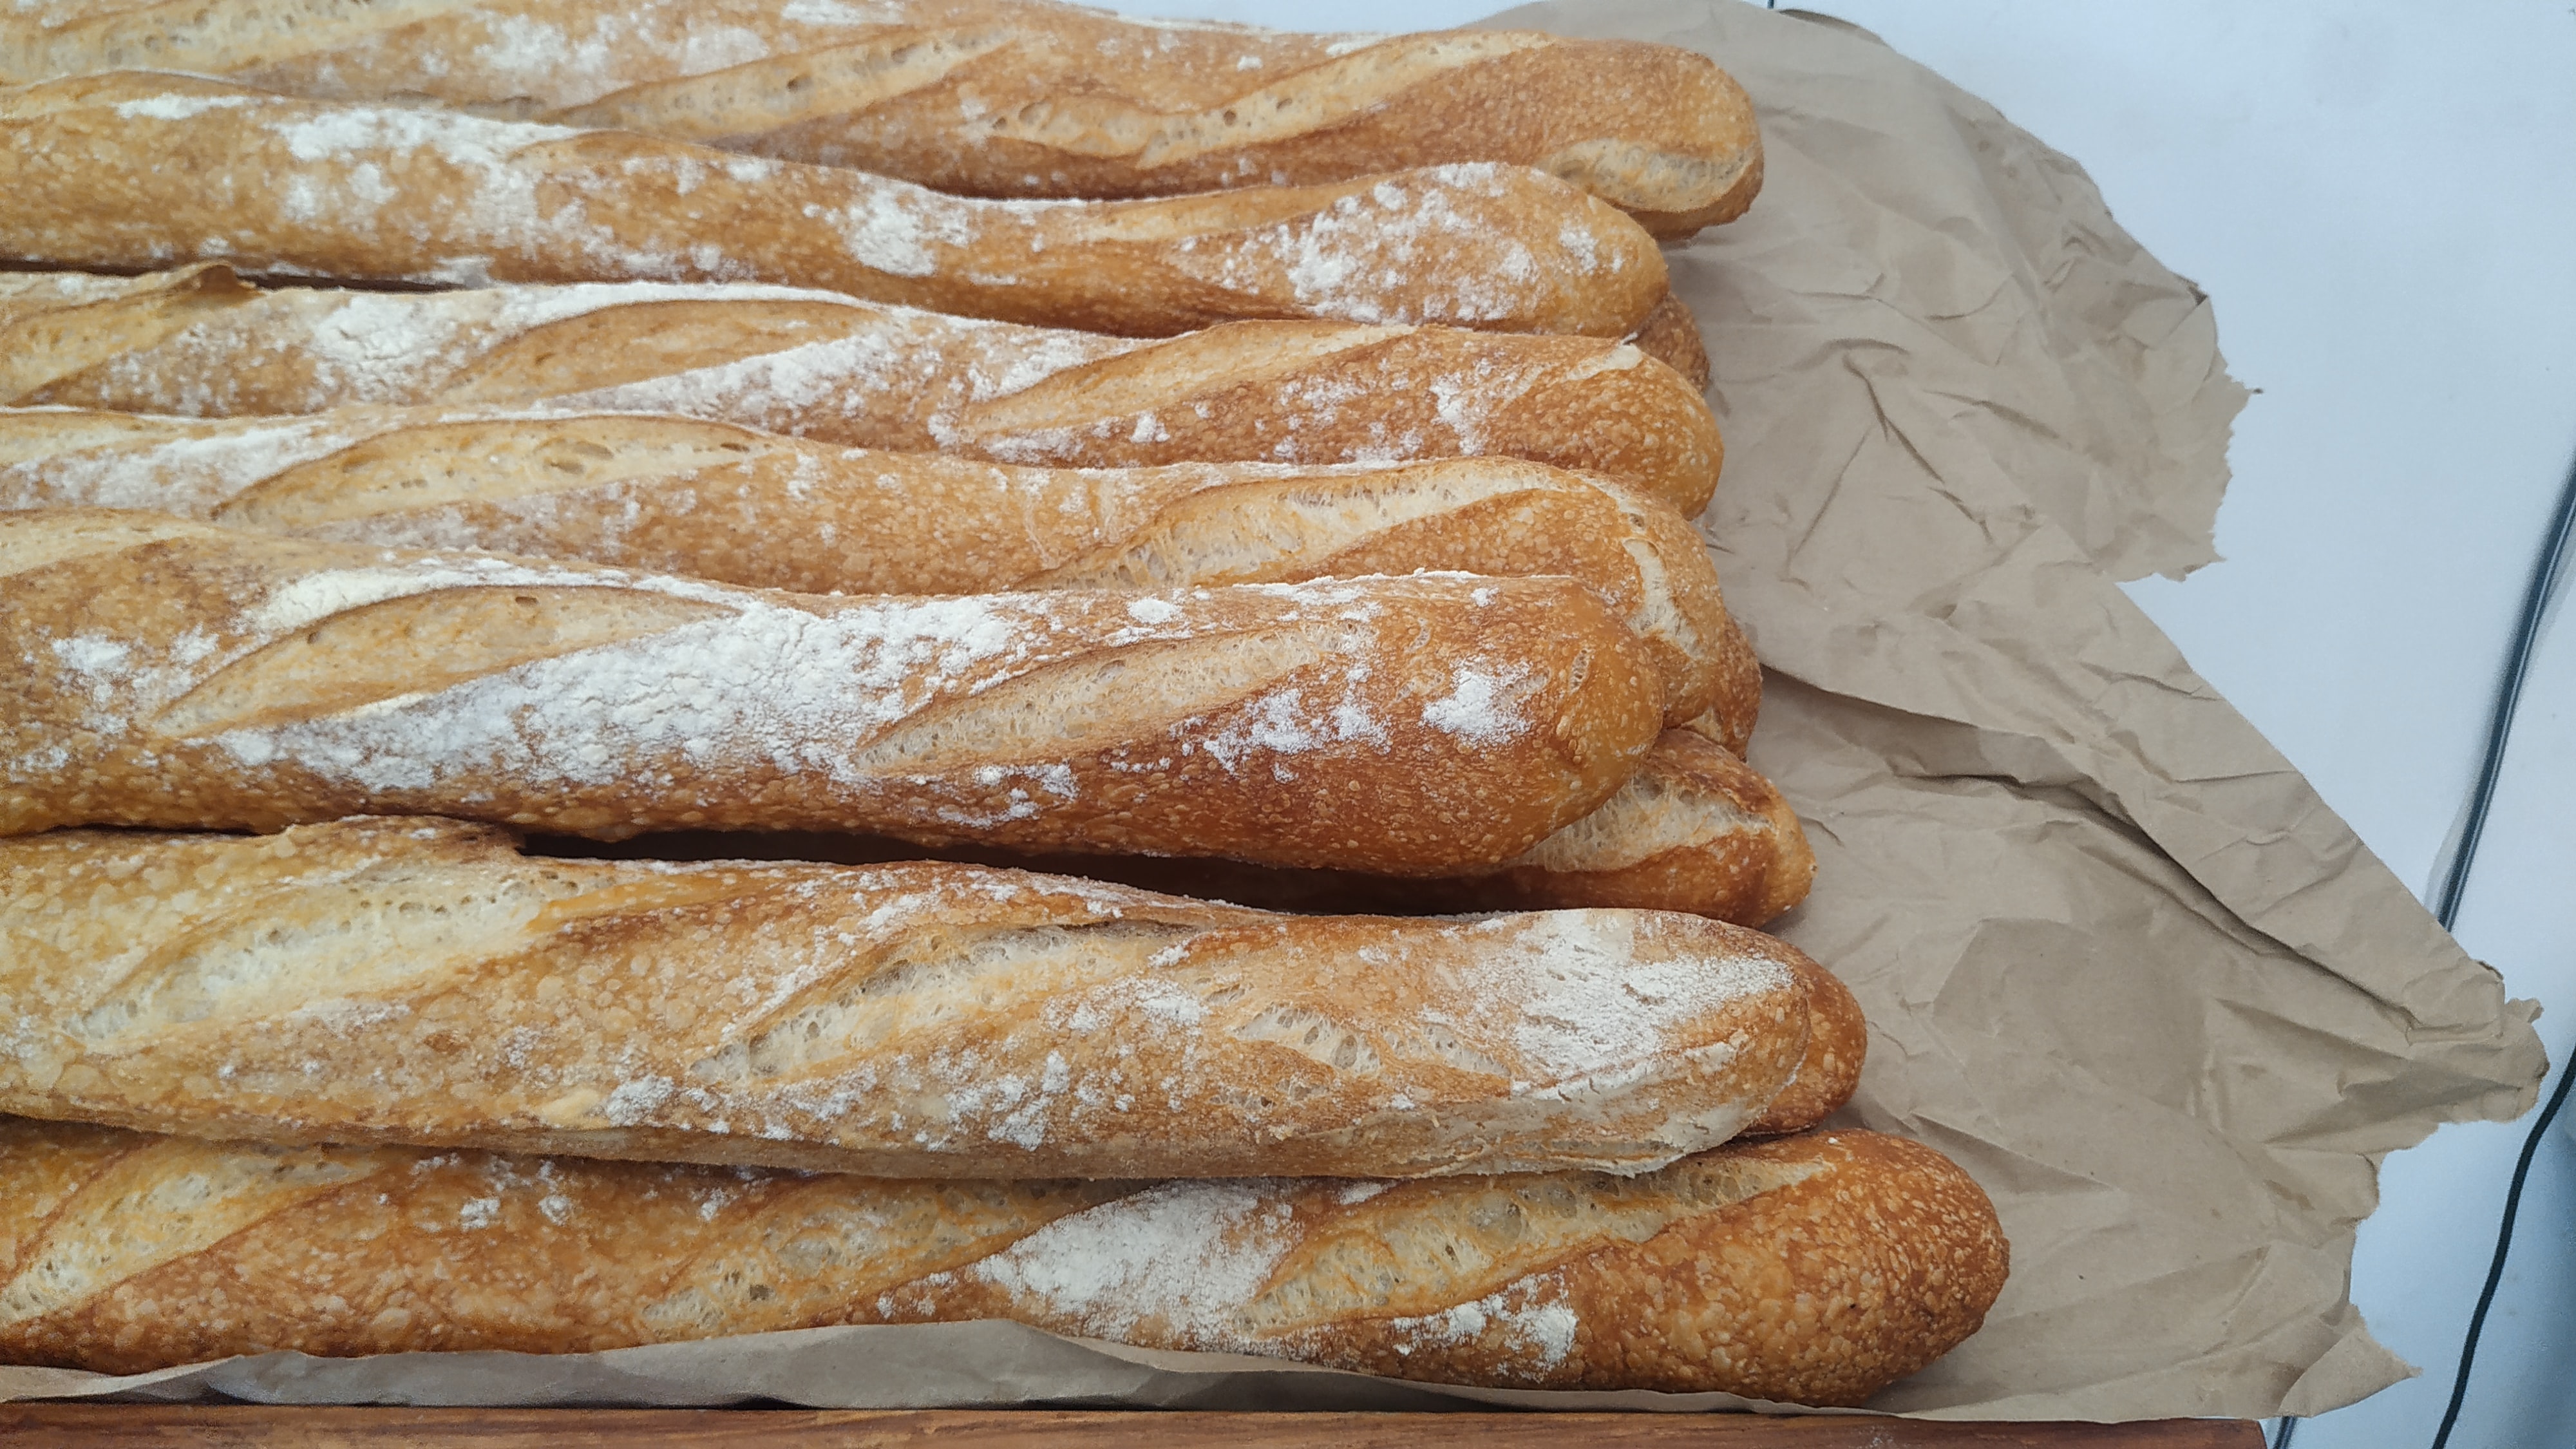 Daily Delivery Tour: Take a Bite of France with these Waimai Options